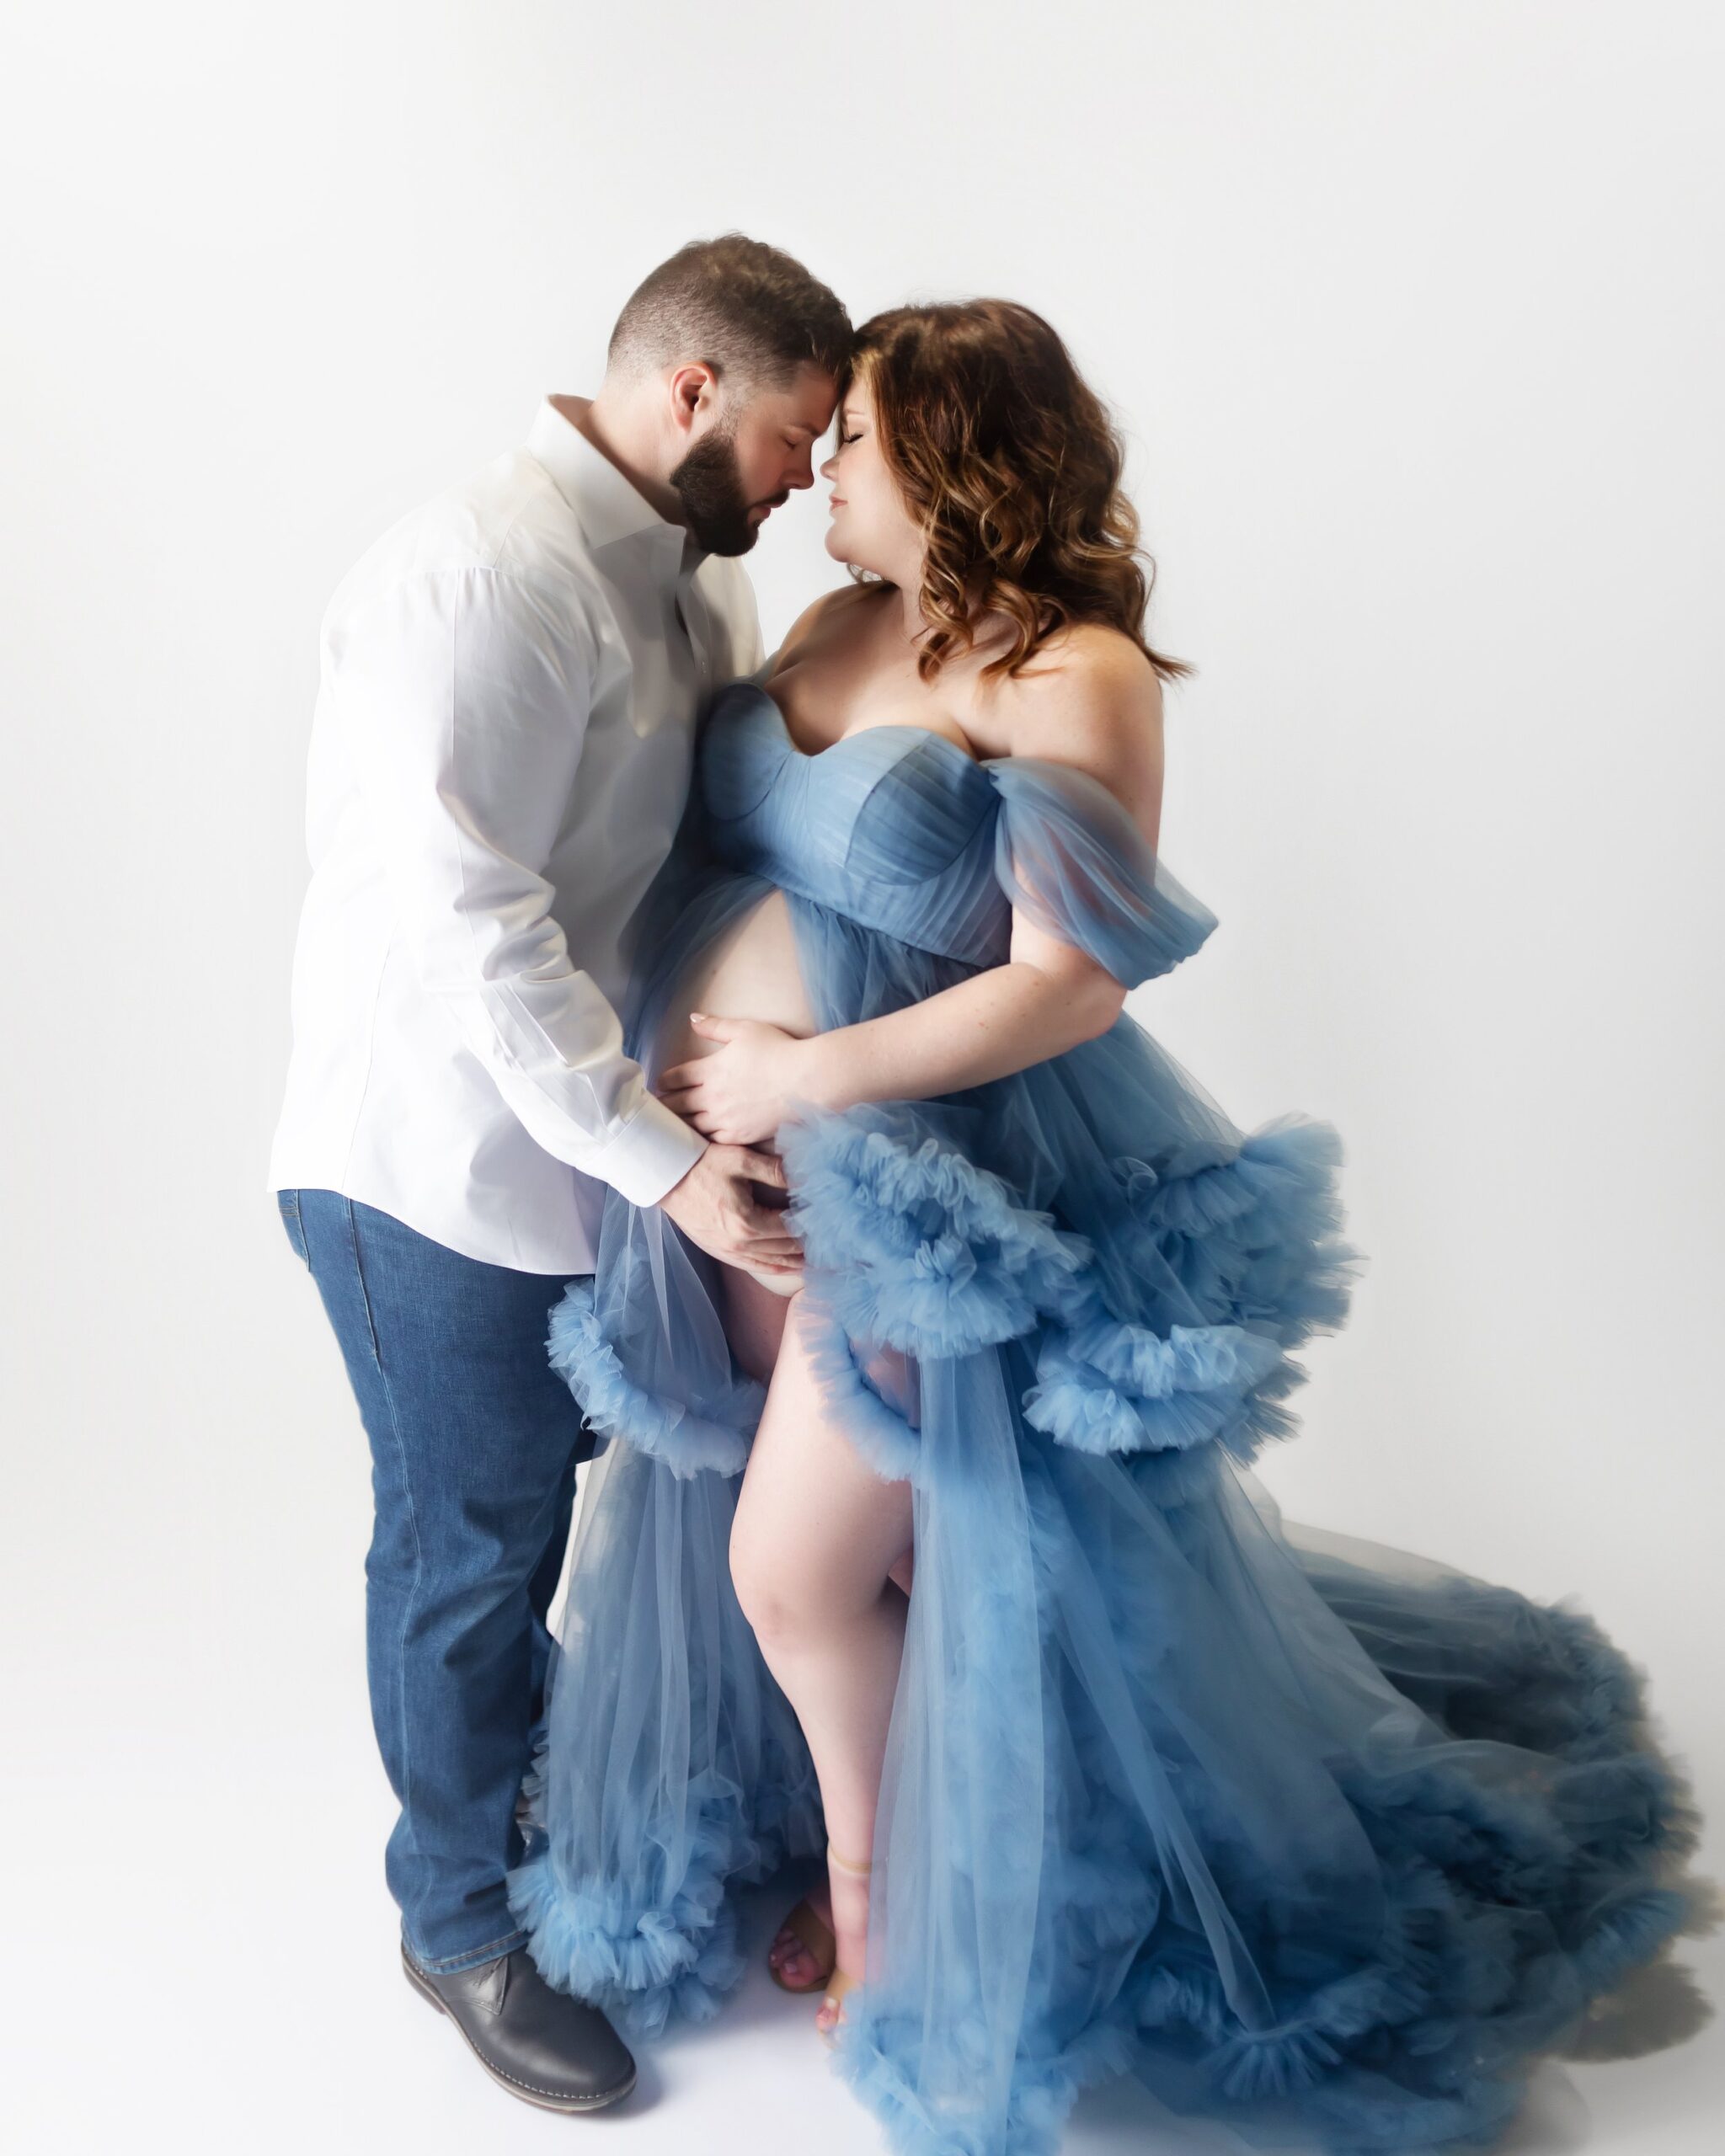 pregnant women wearing a blue gown, during maternity photoshoot in brentwood tennessee photography studio